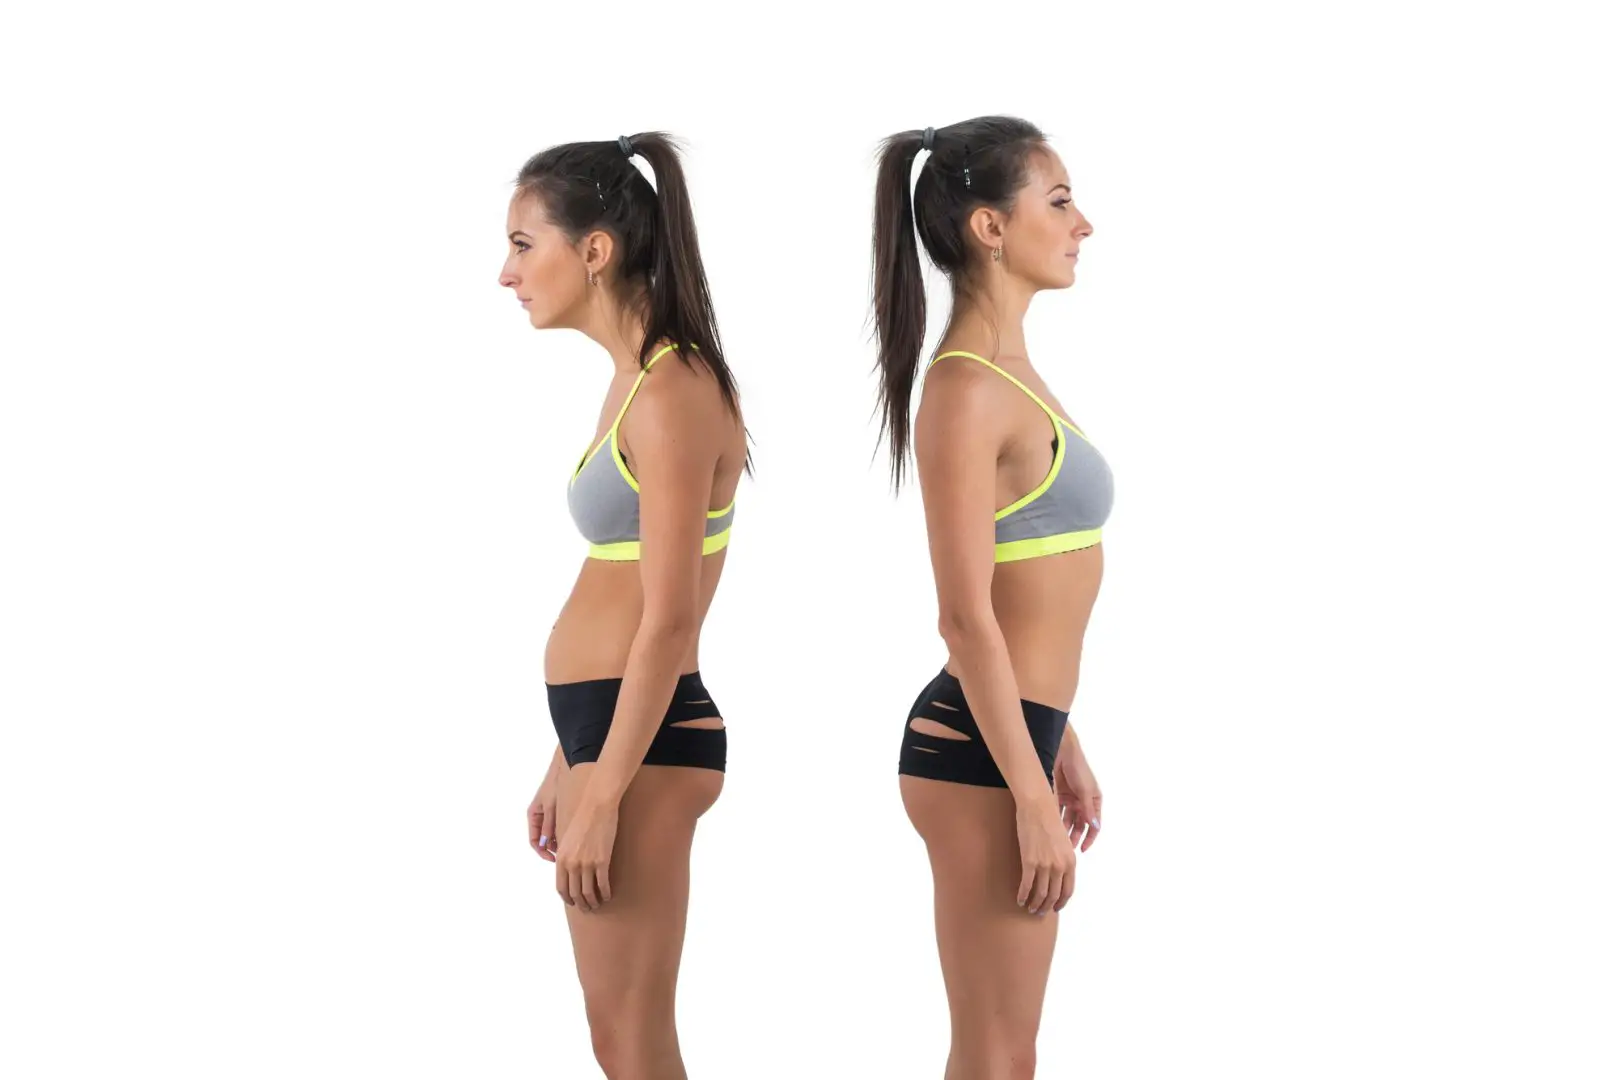 How to Fix Posture with Pilates